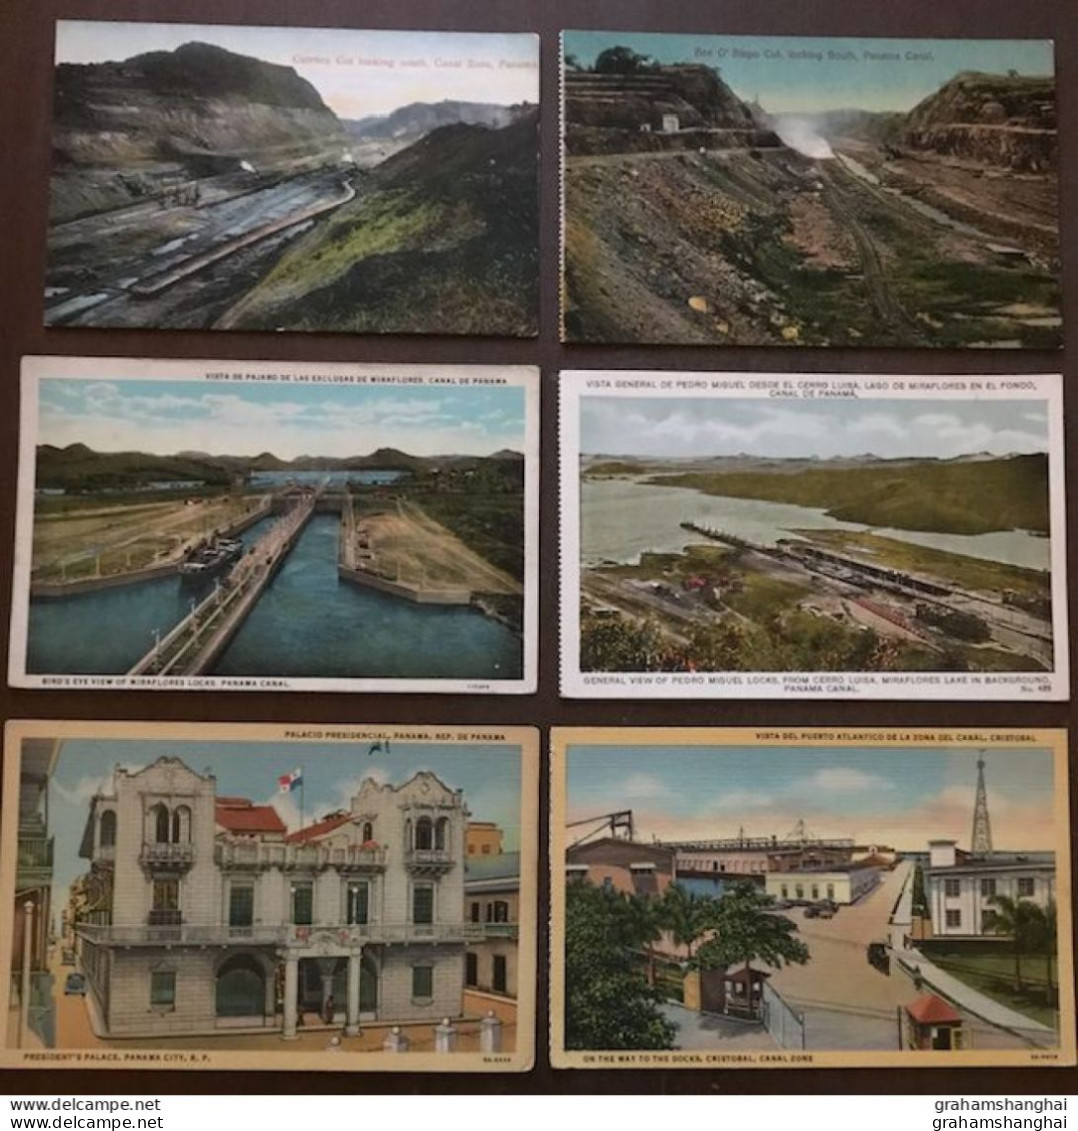 6 Postcards Lot Panama Canal & Canal Zone Construction Miroflores & Pedro Miguel Locks Palace Christobal Docks Unposted - Panamá